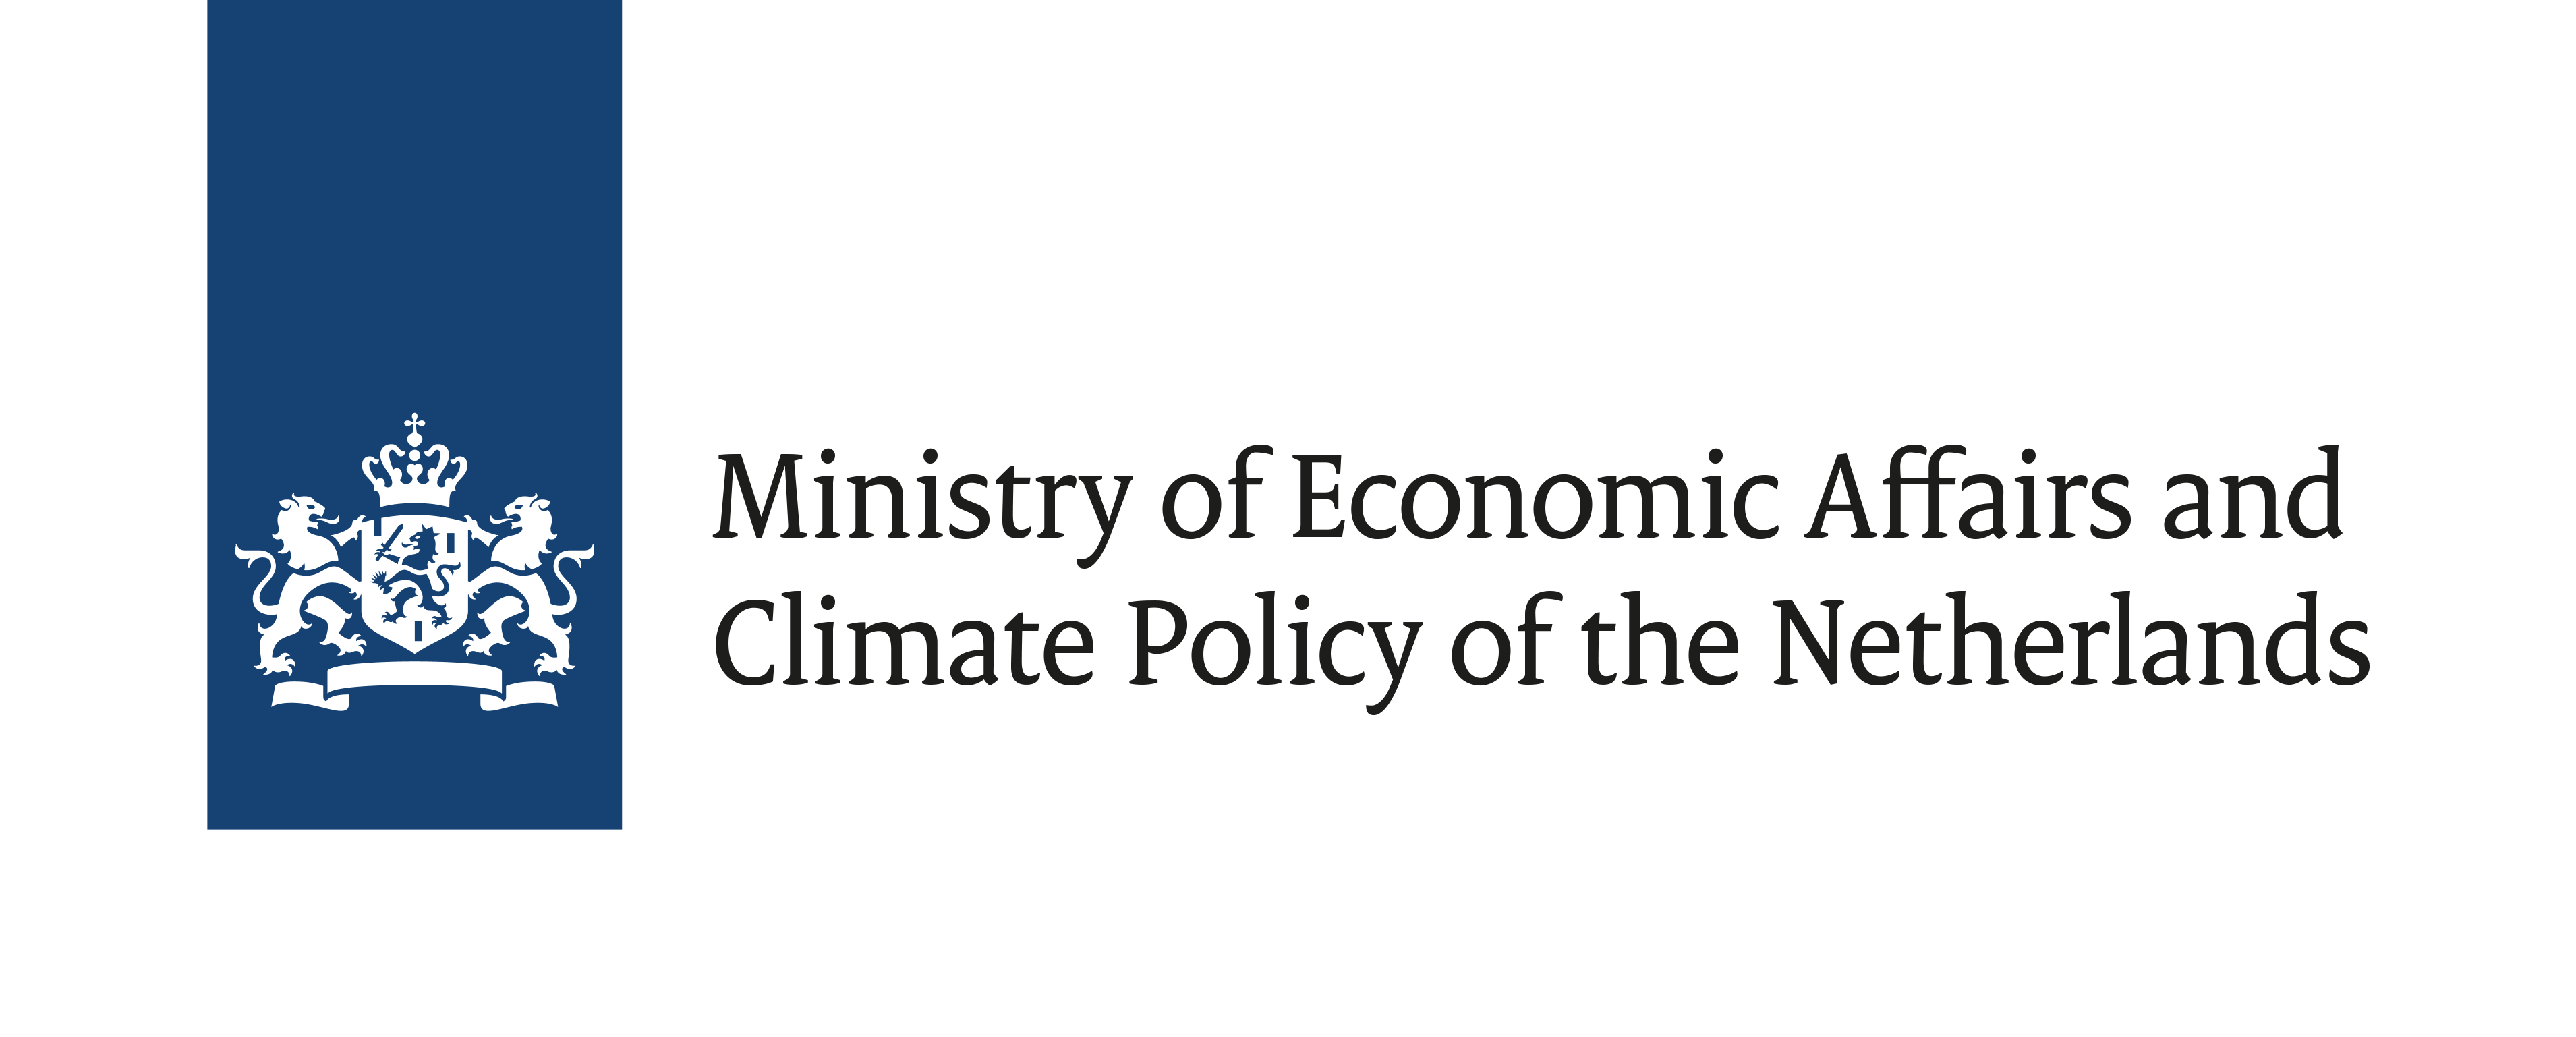 Ministry of Economic Affairs and Climate Policy